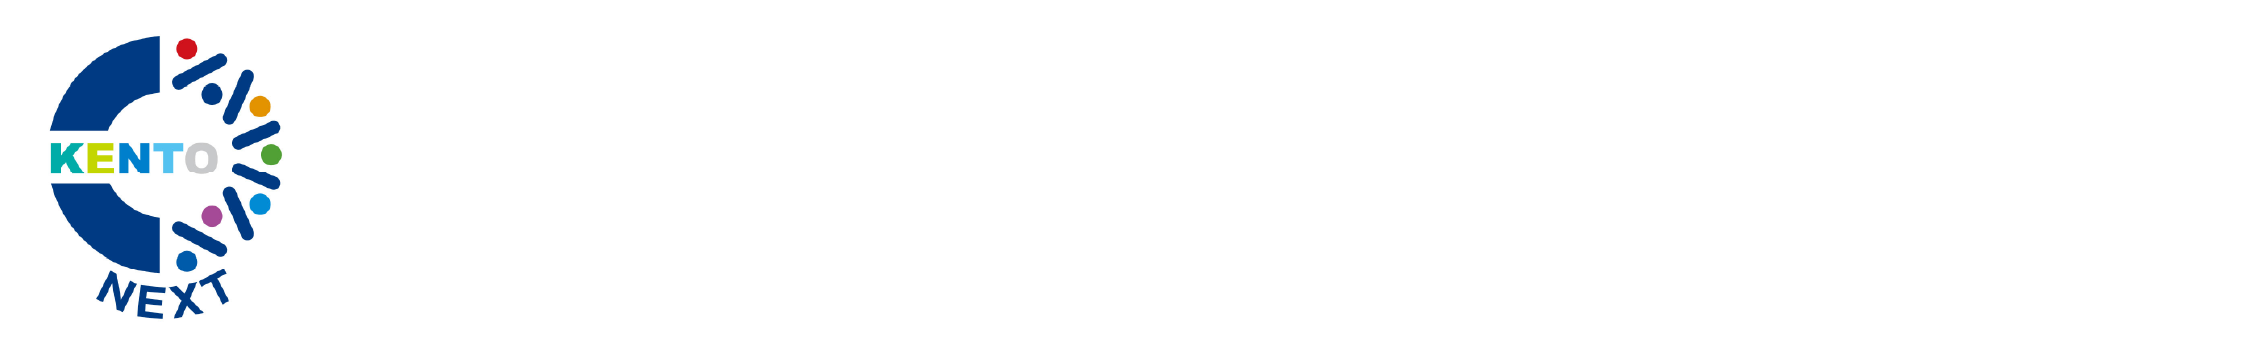 Integrated health industry city site that will be a world model for self-sustained growth of human resources and technology (COI-NEXT)